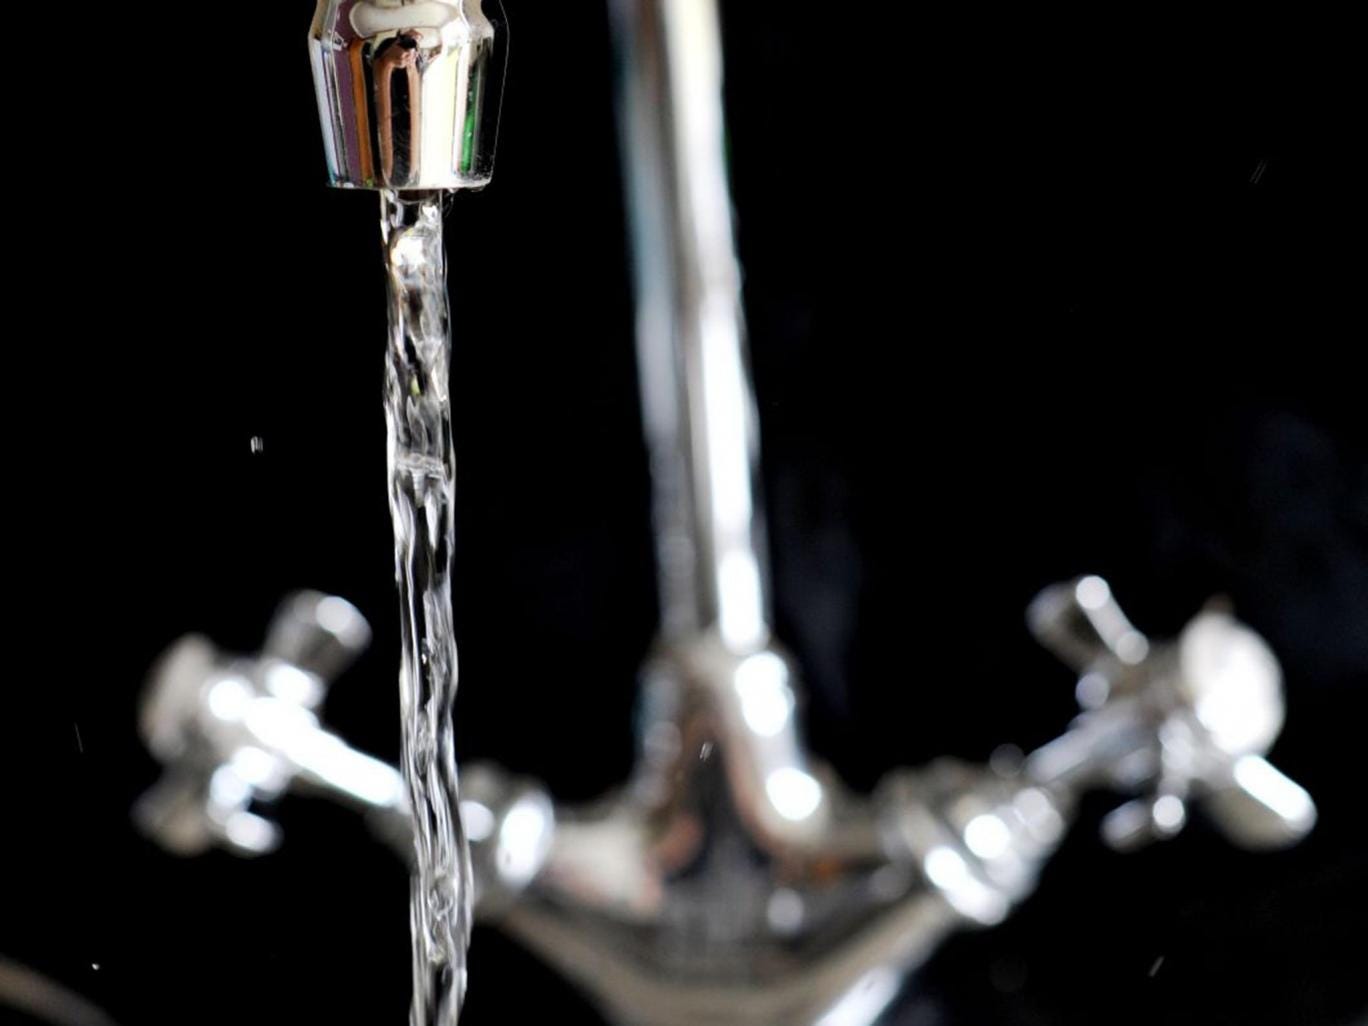 Chicago sued over lead pipes, city says water supply safe